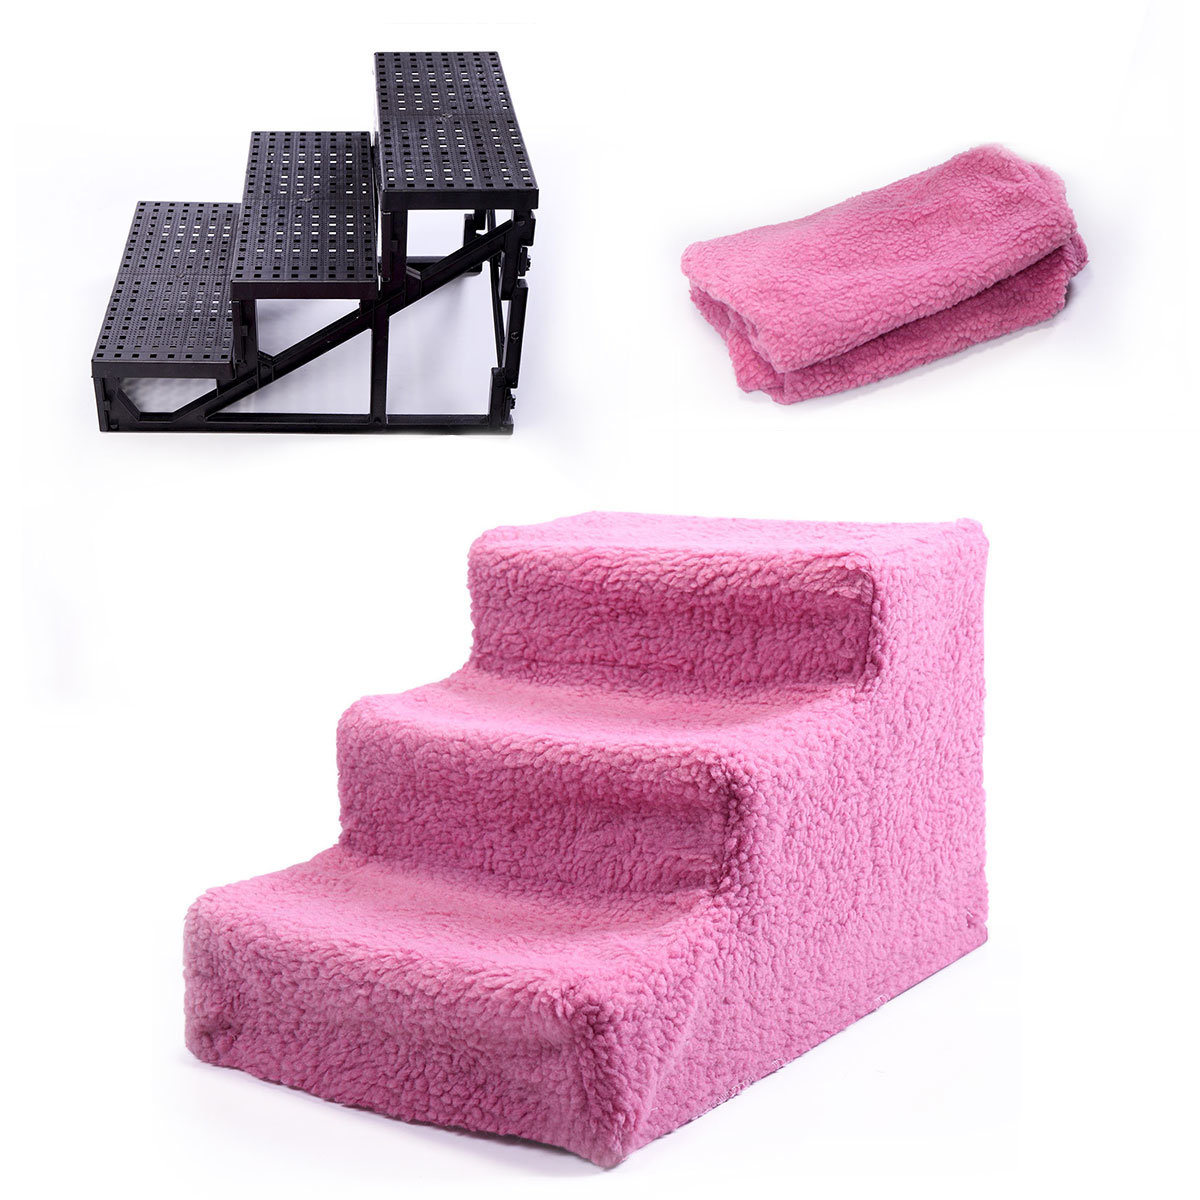 maocao hoom Pink Plastic Dog/Cat Steps - Small Pet Indoor Stairs with Fabric Tread - 3 Steps - Removable Cover - Easy Assembly - Black Frame | BH99588